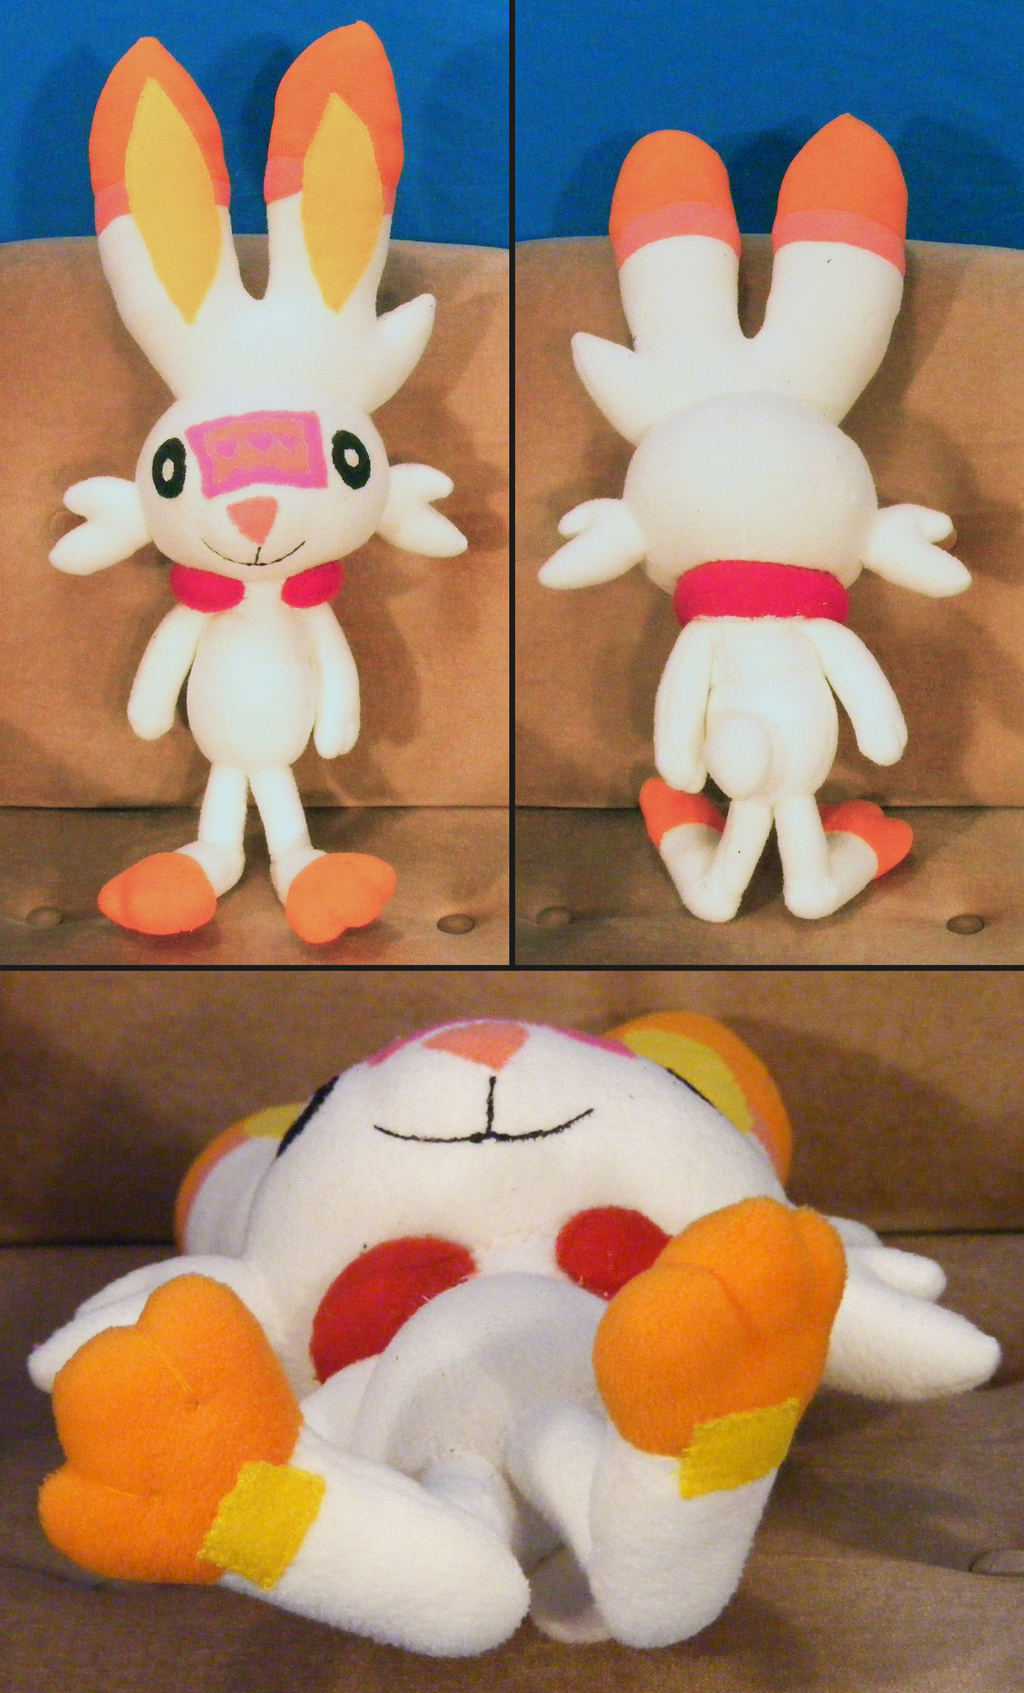 Large Tracey Scouter the Scorbunny Plush